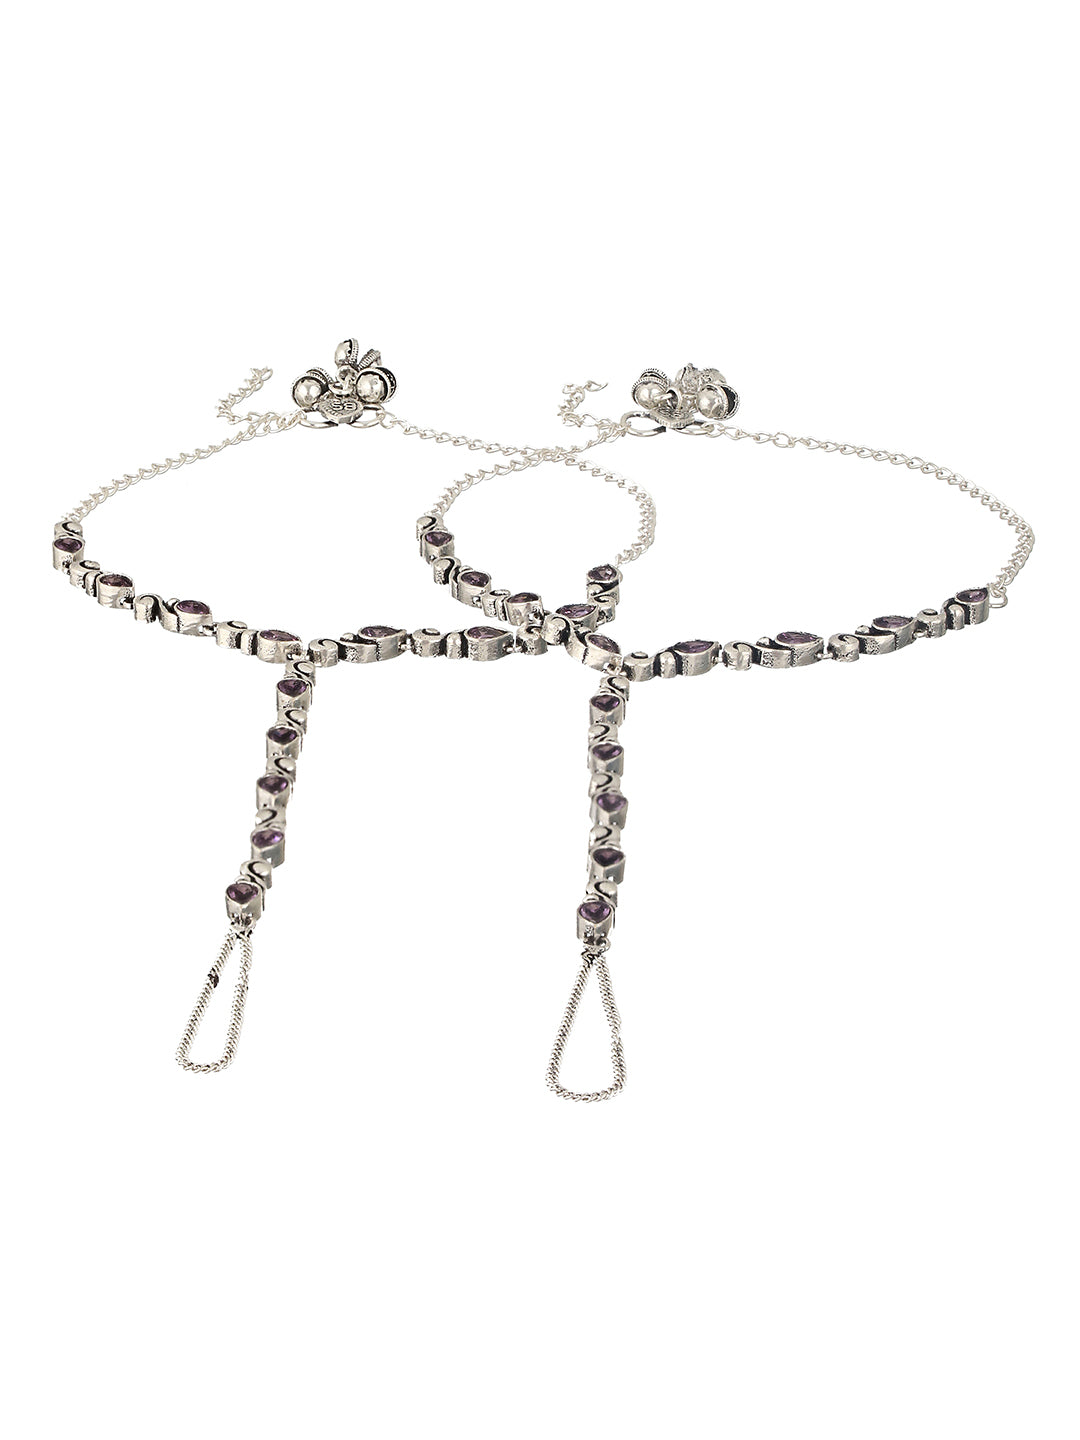 Silver Oxidised Stone Studded Foot Harnass Anklet Payel